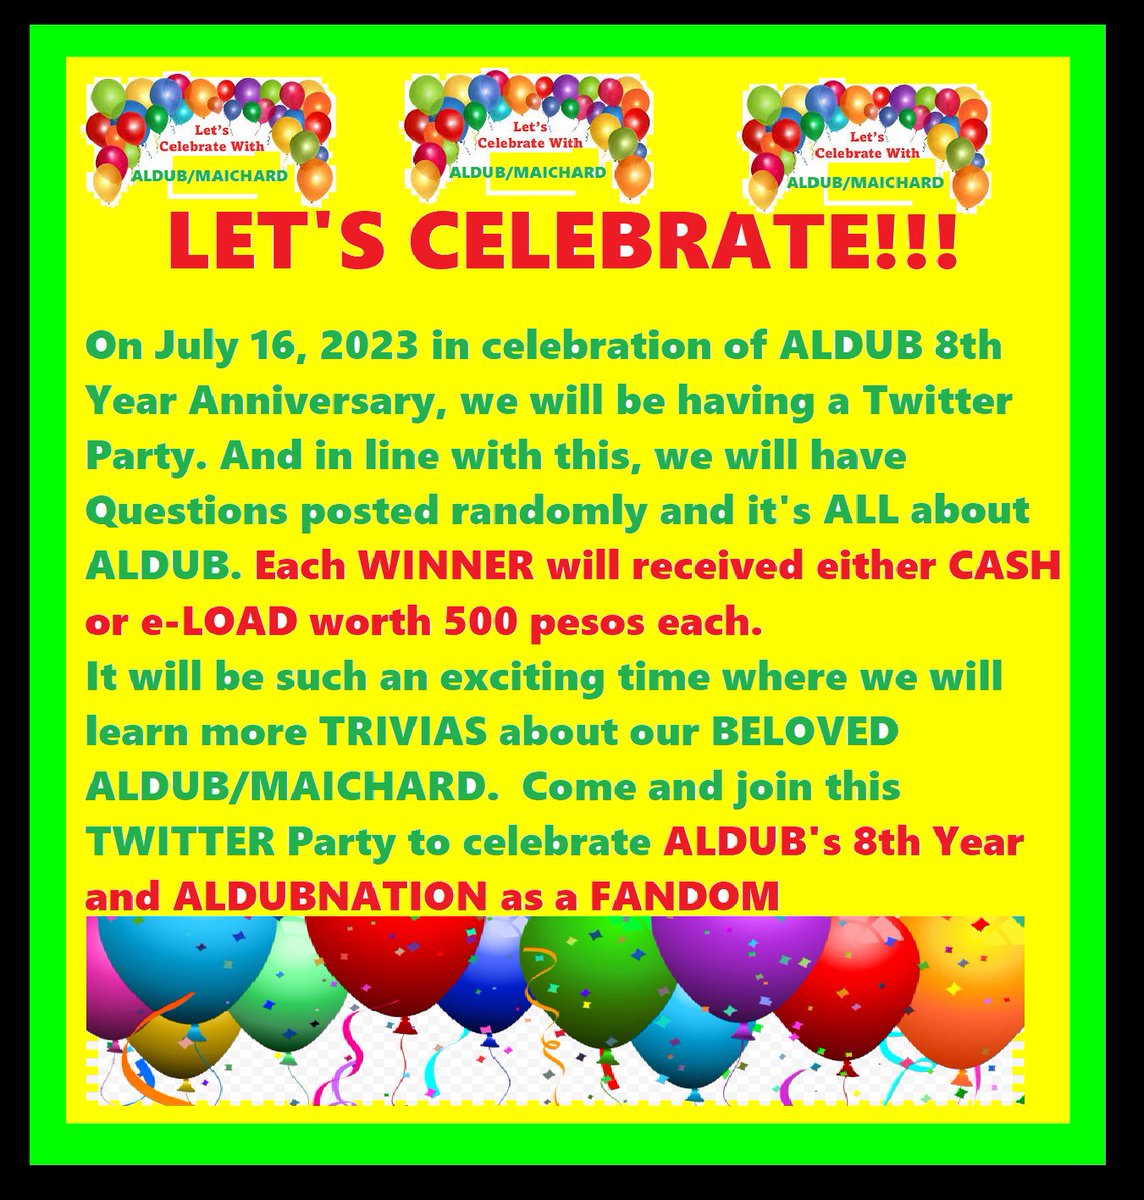 ATTN: To ALDUBNATION WW you are all invited to join our TWITTER PARTY using a UNIFIED HT on July 16 & win prizes for our TRIVIA QUESTIONS.... JOIN THE PARTY & HAVE FUN. 🎉🎉🎉
Let's Celebrate ALDUB's 8th Year Anniversary..
#BOYCOTTGMAxTV5xTVJ837